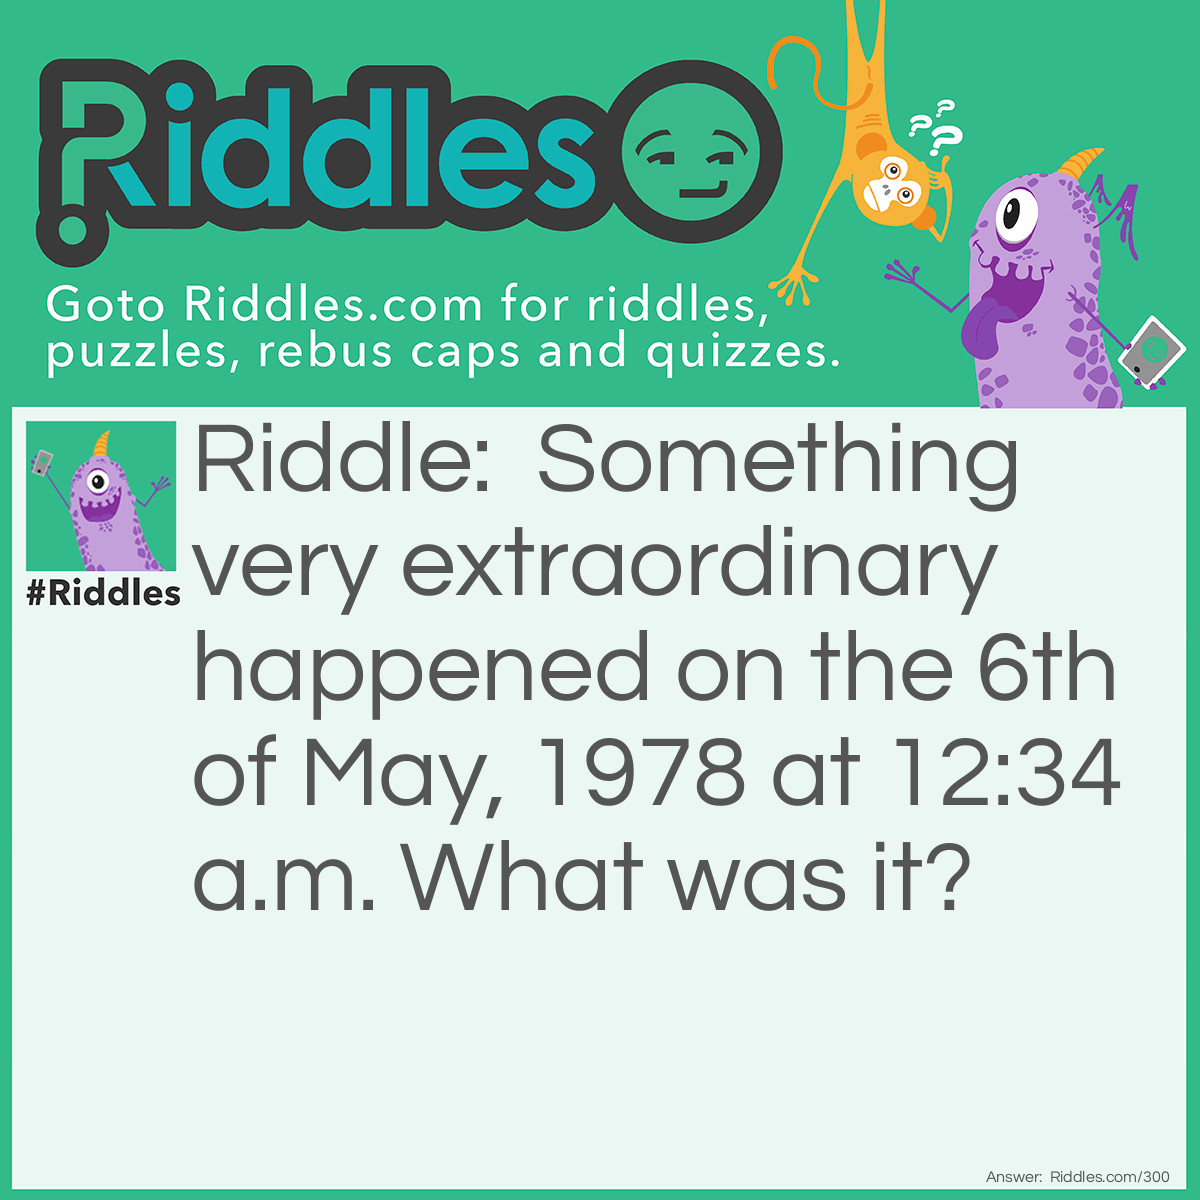 Riddle: Something very extraordinary happened on the 6th of May, 1978 at 12:34 a.m. What was it? Answer: At that moment, the time and day could be written as: 12:34, 5/6/78.